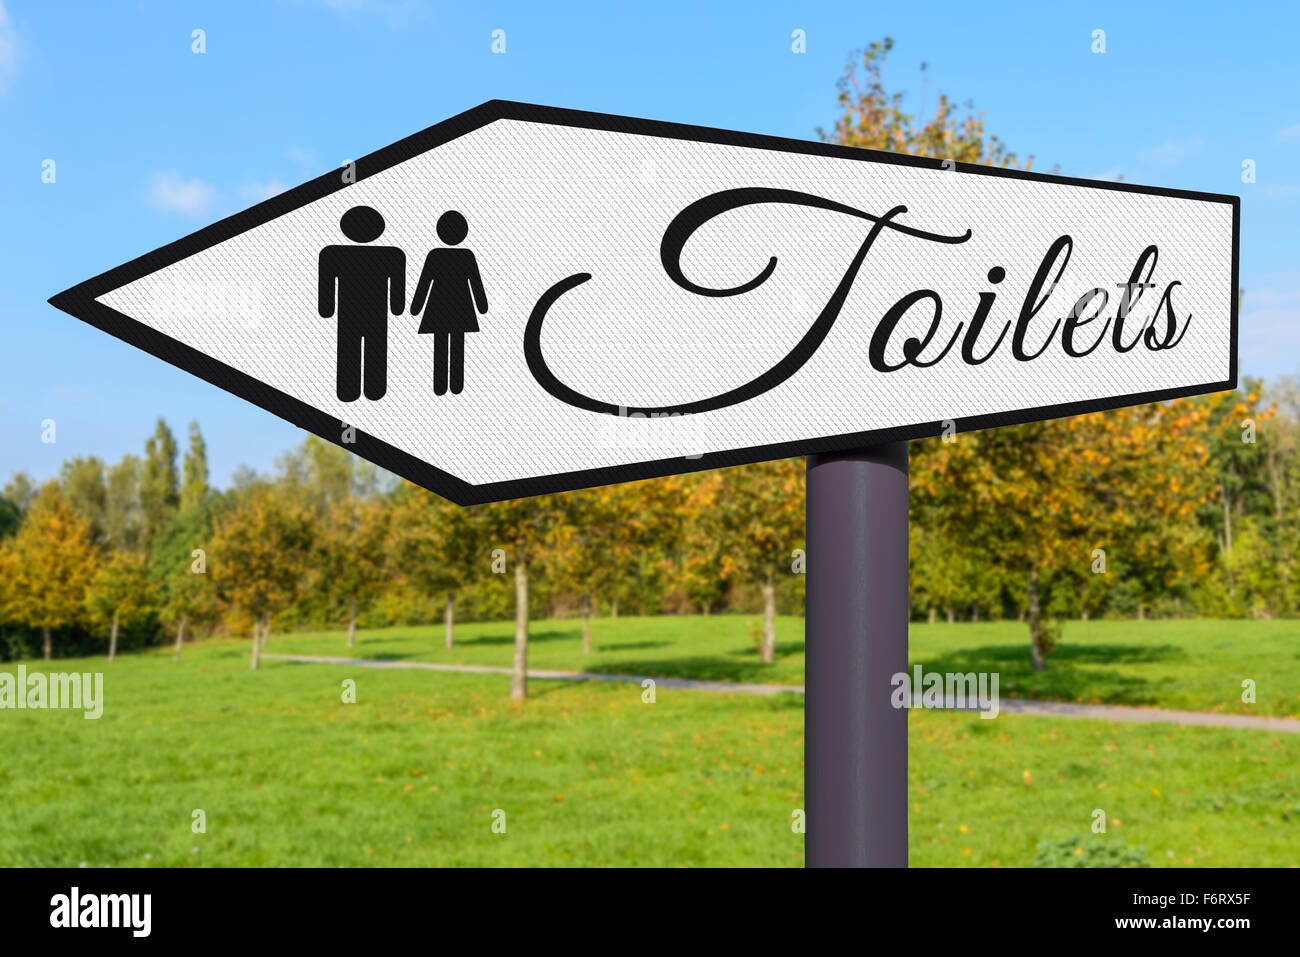 Toilet sign. Signpost pointing to the direction of public toilets. Stock Photo